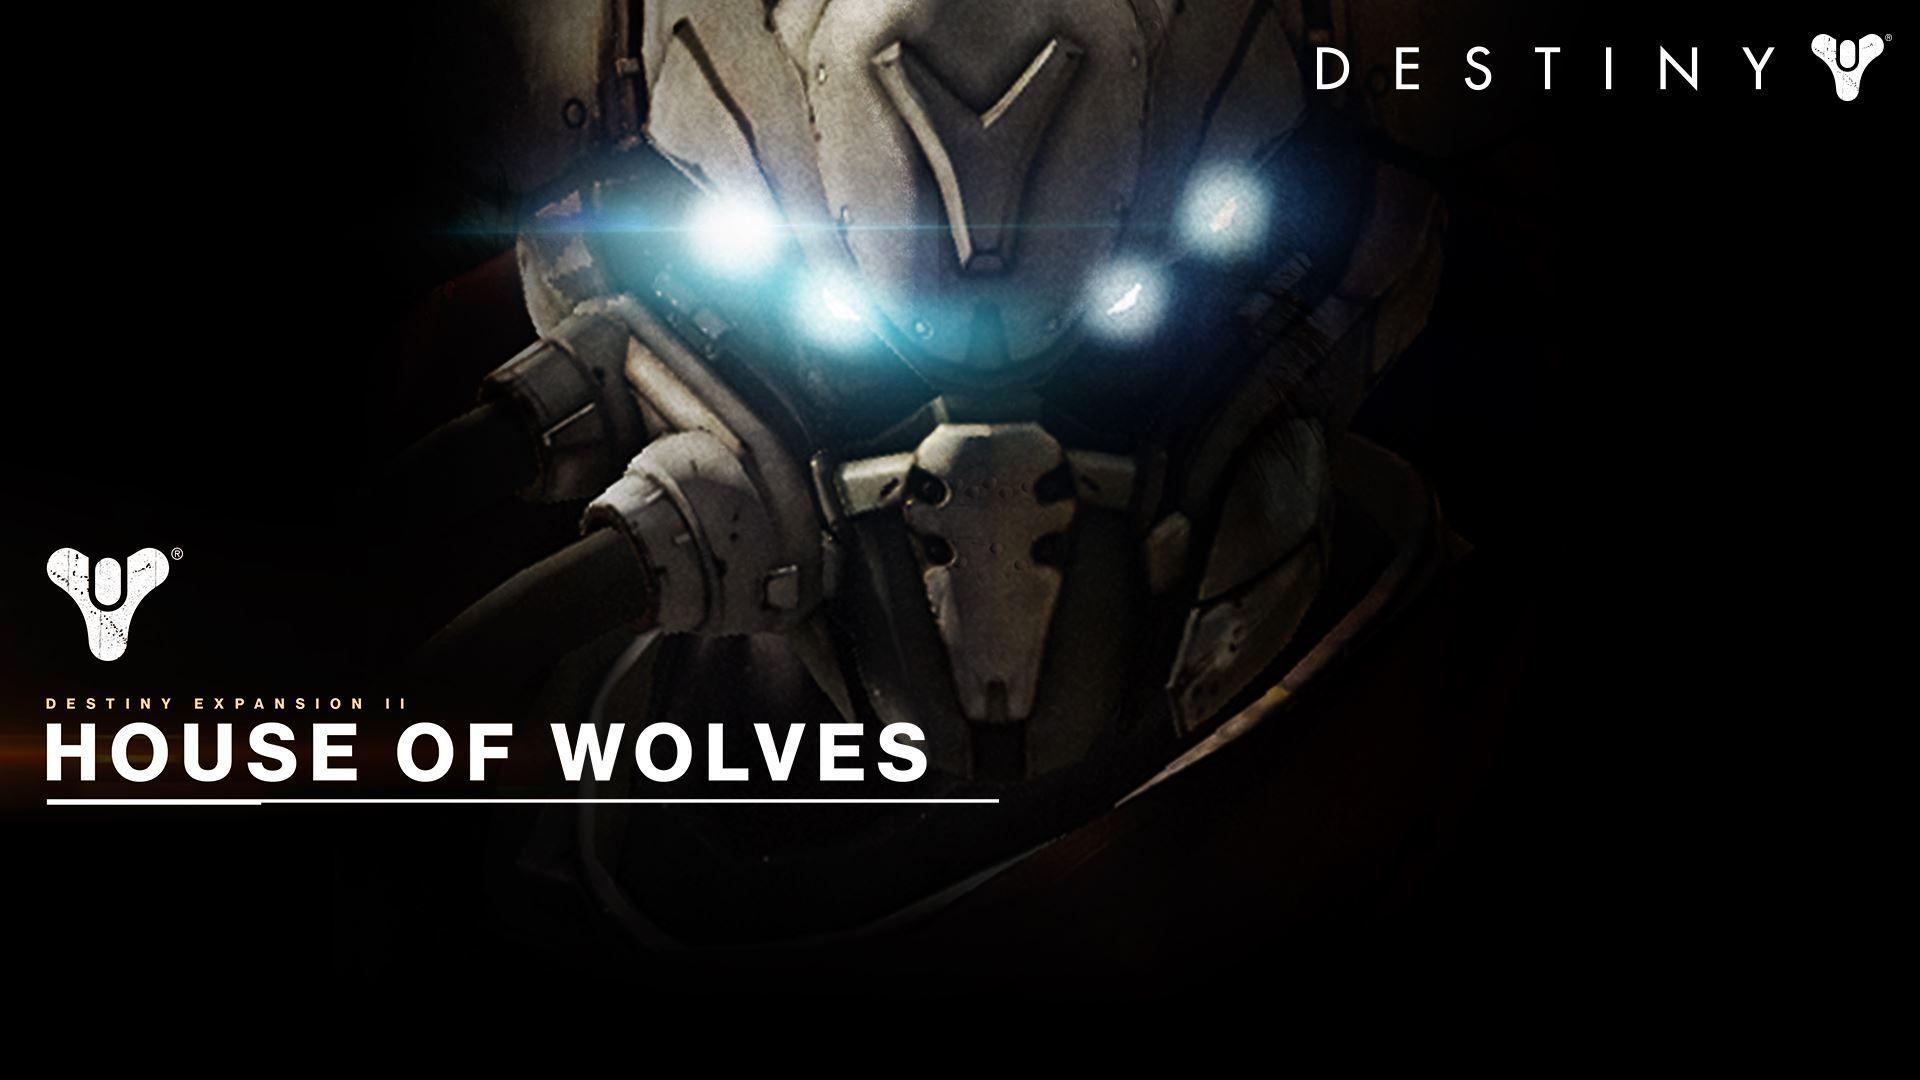 House of Wolves Destiny Logo - House of Wolves (Expansion) | Destiny Wiki | FANDOM powered by Wikia